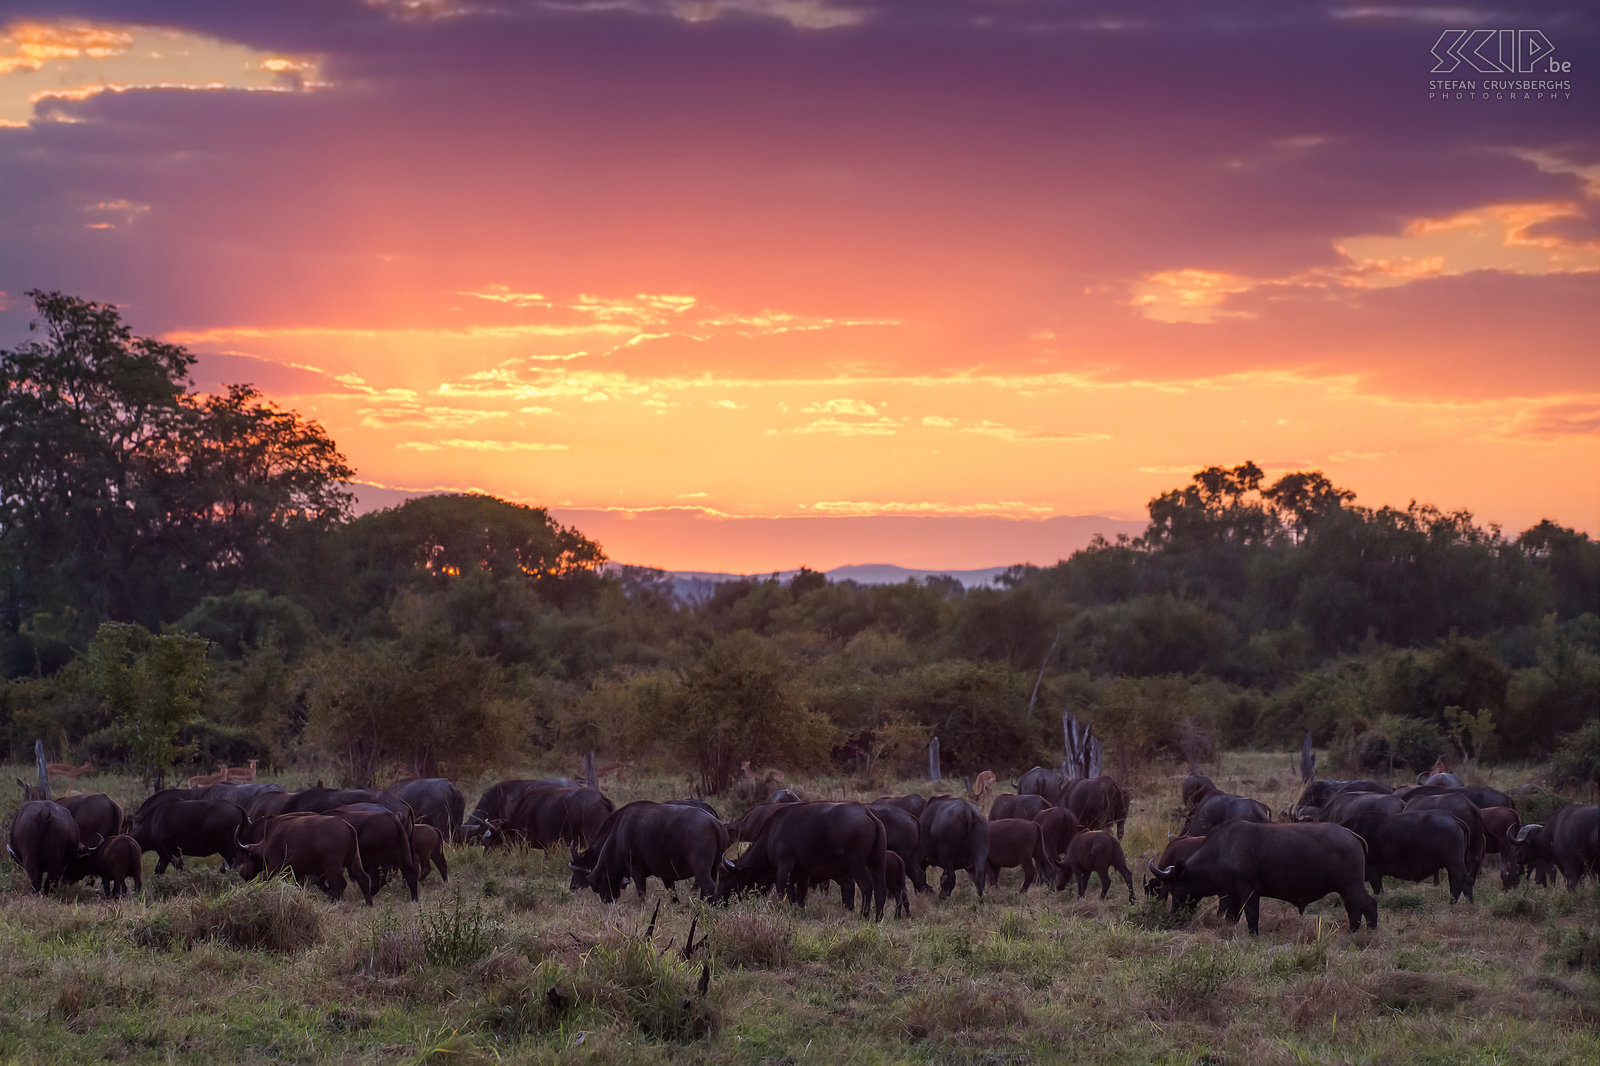 South Luangwa - Buffalo's at sunset At sunset we encountered a group of 100 African buffalos (Syncerus caffer). The buffalo is a member of the 'big five' and regarded as a very dangerous animal because they can be aggressive and attack people. Stefan Cruysberghs